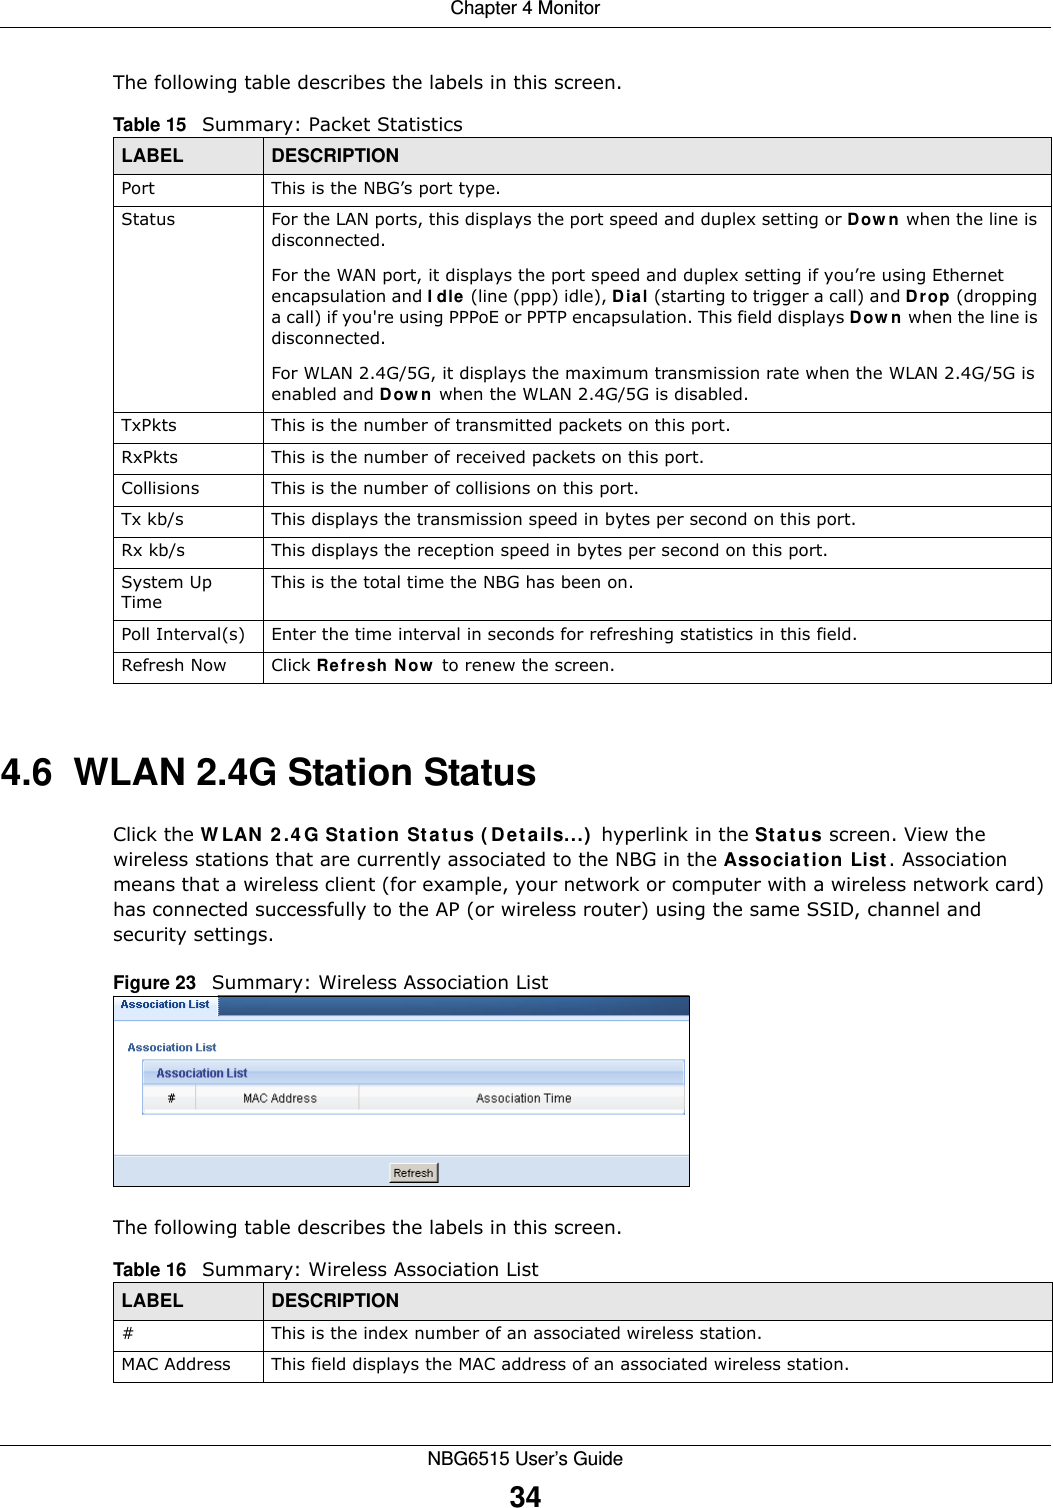 Chapter 4 MonitorNBG6515 User’s Guide34The following table describes the labels in this screen.4.6  WLAN 2.4G Station Status     Click the WLAN 2.4G Station Status (Details...) hyperlink in the Status screen. View the wireless stations that are currently associated to the NBG in the Association List. Association means that a wireless client (for example, your network or computer with a wireless network card) has connected successfully to the AP (or wireless router) using the same SSID, channel and security settings.Figure 23   Summary: Wireless Association ListThe following table describes the labels in this screen.Table 15   Summary: Packet StatisticsLABEL DESCRIPTIONPort This is the NBG’s port type.Status  For the LAN ports, this displays the port speed and duplex setting or Down when the line is disconnected.For the WAN port, it displays the port speed and duplex setting if you’re using Ethernet encapsulation and Idle (line (ppp) idle), Dial (starting to trigger a call) and Drop (dropping a call) if you&apos;re using PPPoE or PPTP encapsulation. This field displays Down when the line is disconnected.For WLAN 2.4G/5G, it displays the maximum transmission rate when the WLAN 2.4G/5G is enabled and Down when the WLAN 2.4G/5G is disabled.TxPkts  This is the number of transmitted packets on this port.RxPkts  This is the number of received packets on this port.Collisions  This is the number of collisions on this port.Tx kb/s  This displays the transmission speed in bytes per second on this port.Rx kb/s This displays the reception speed in bytes per second on this port.System Up TimeThis is the total time the NBG has been on.Poll Interval(s) Enter the time interval in seconds for refreshing statistics in this field.Refresh Now Click Refresh Now to renew the screen.Table 16   Summary: Wireless Association ListLABEL DESCRIPTION#  This is the index number of an associated wireless station. MAC Address  This field displays the MAC address of an associated wireless station.